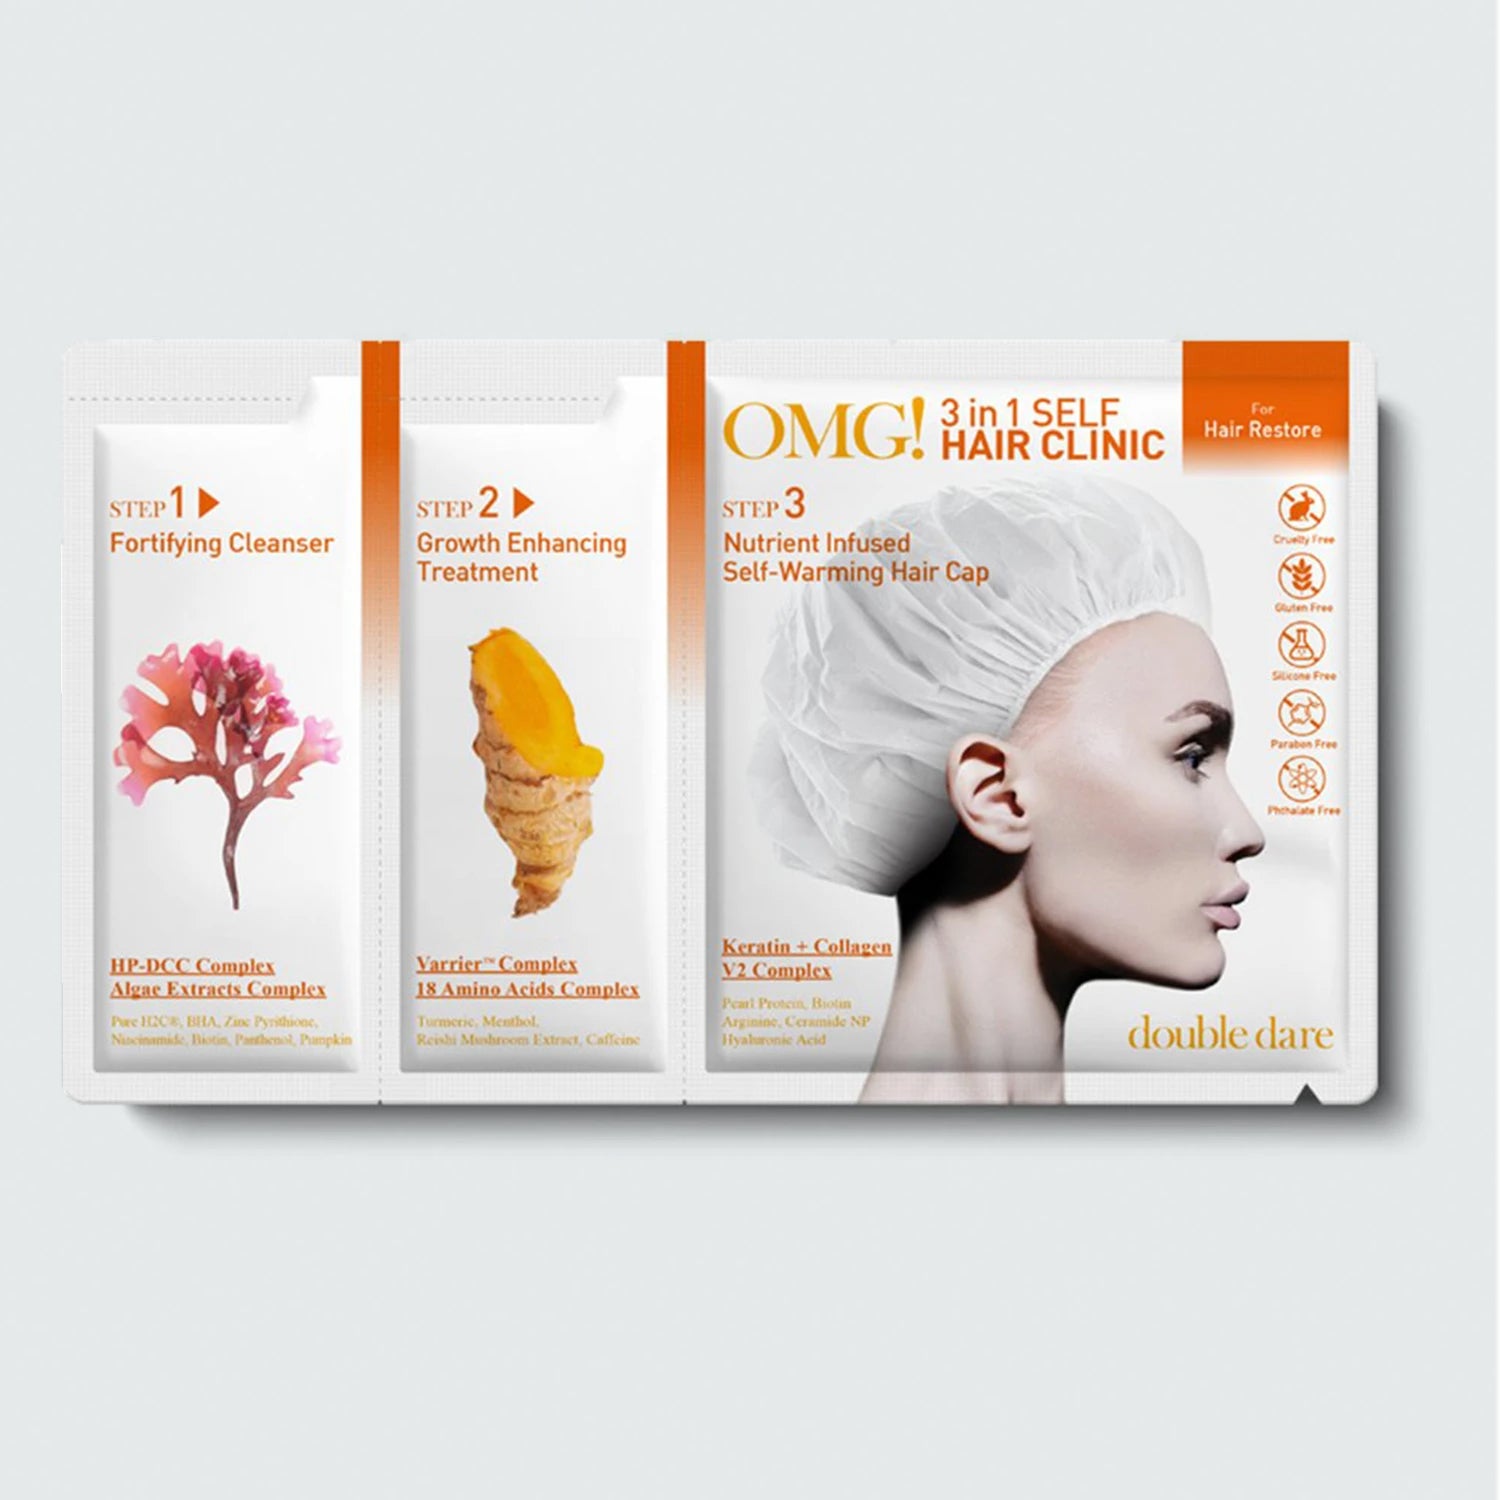 OMG! 3in1 Self HAIR <br> CLINIC for Hair Restore - DOUBLE DARE